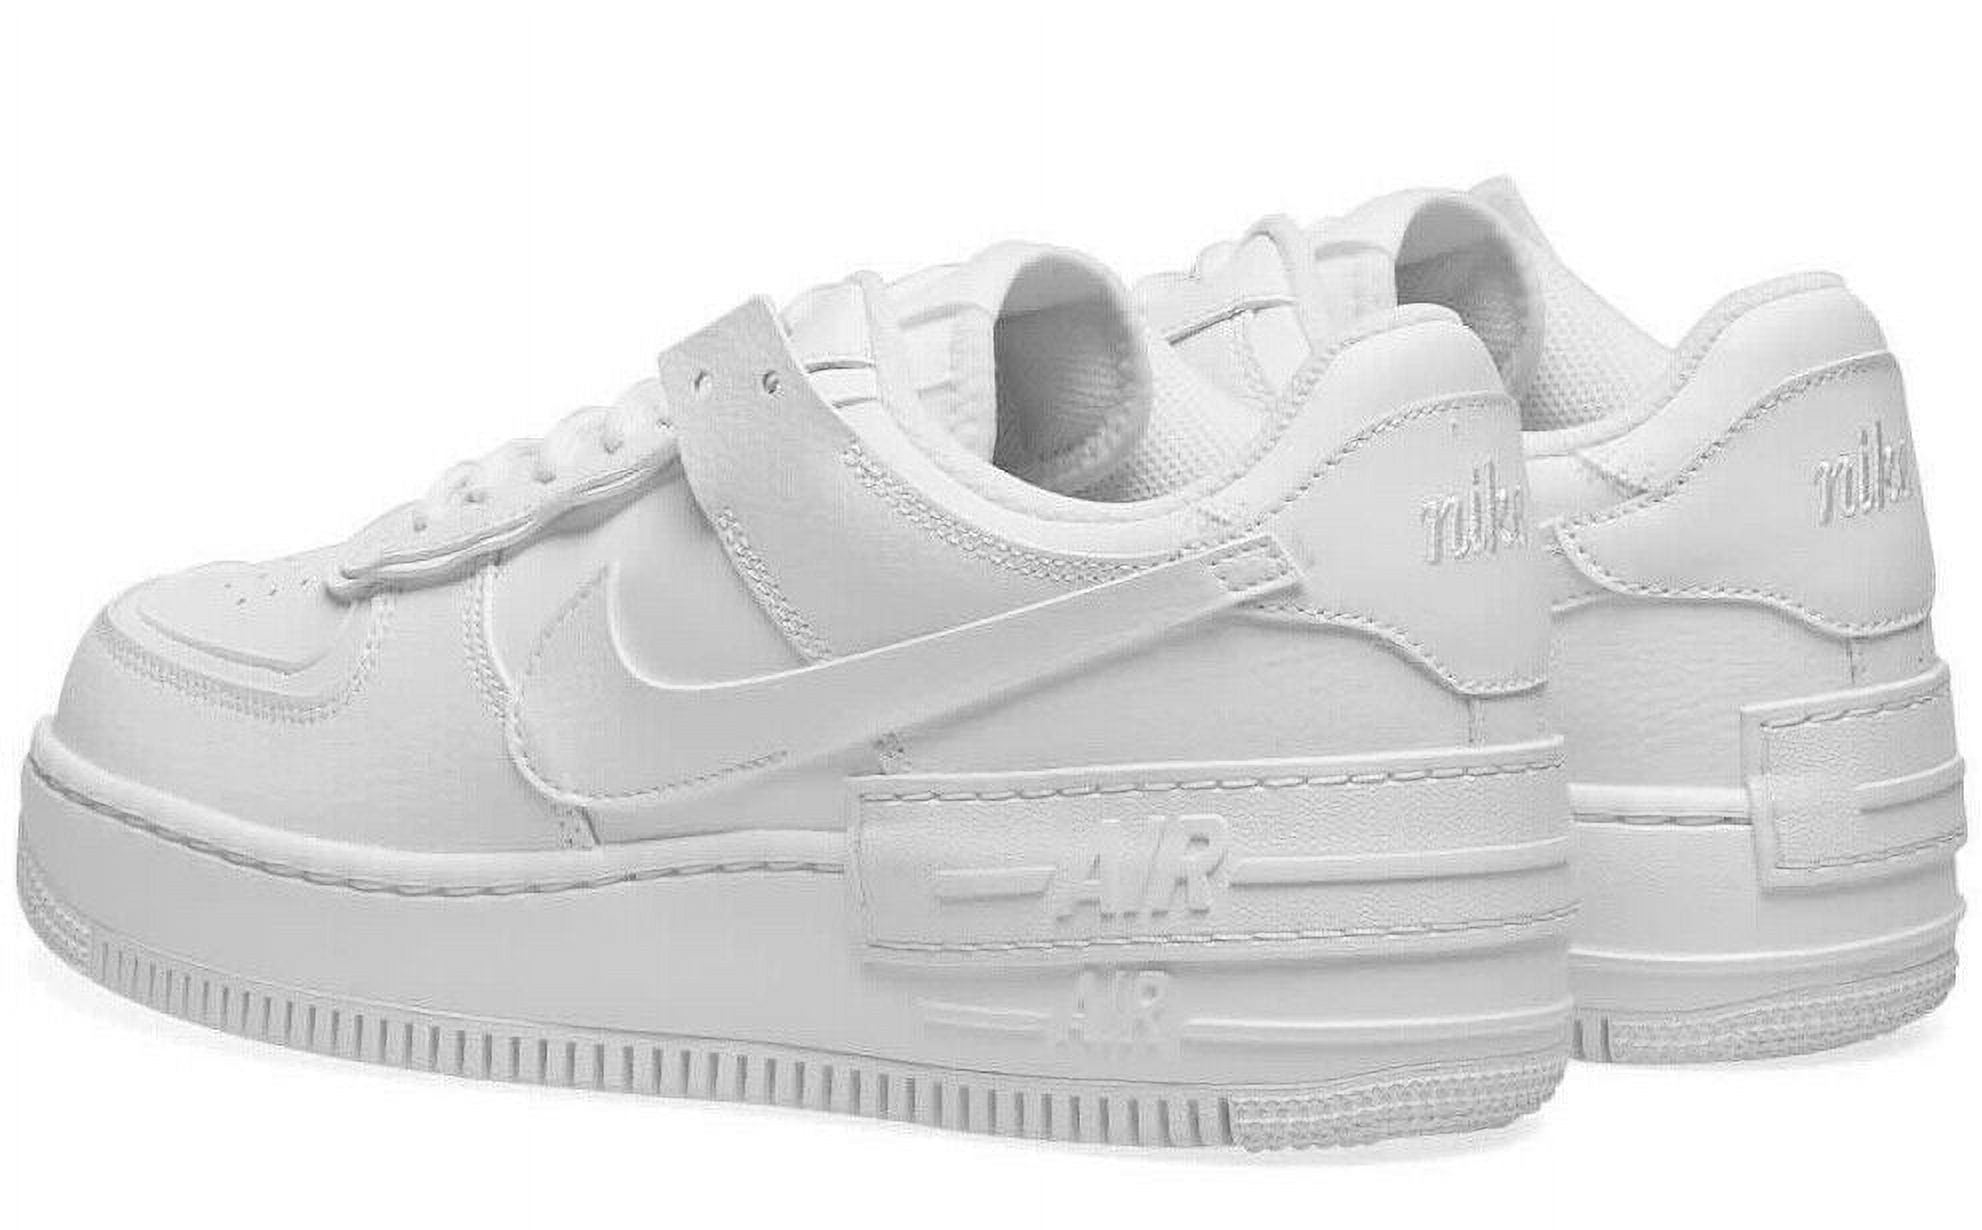 Nike Air Force 1 Shadow Sneaker in White/White/White at Nordstrom, Size 9